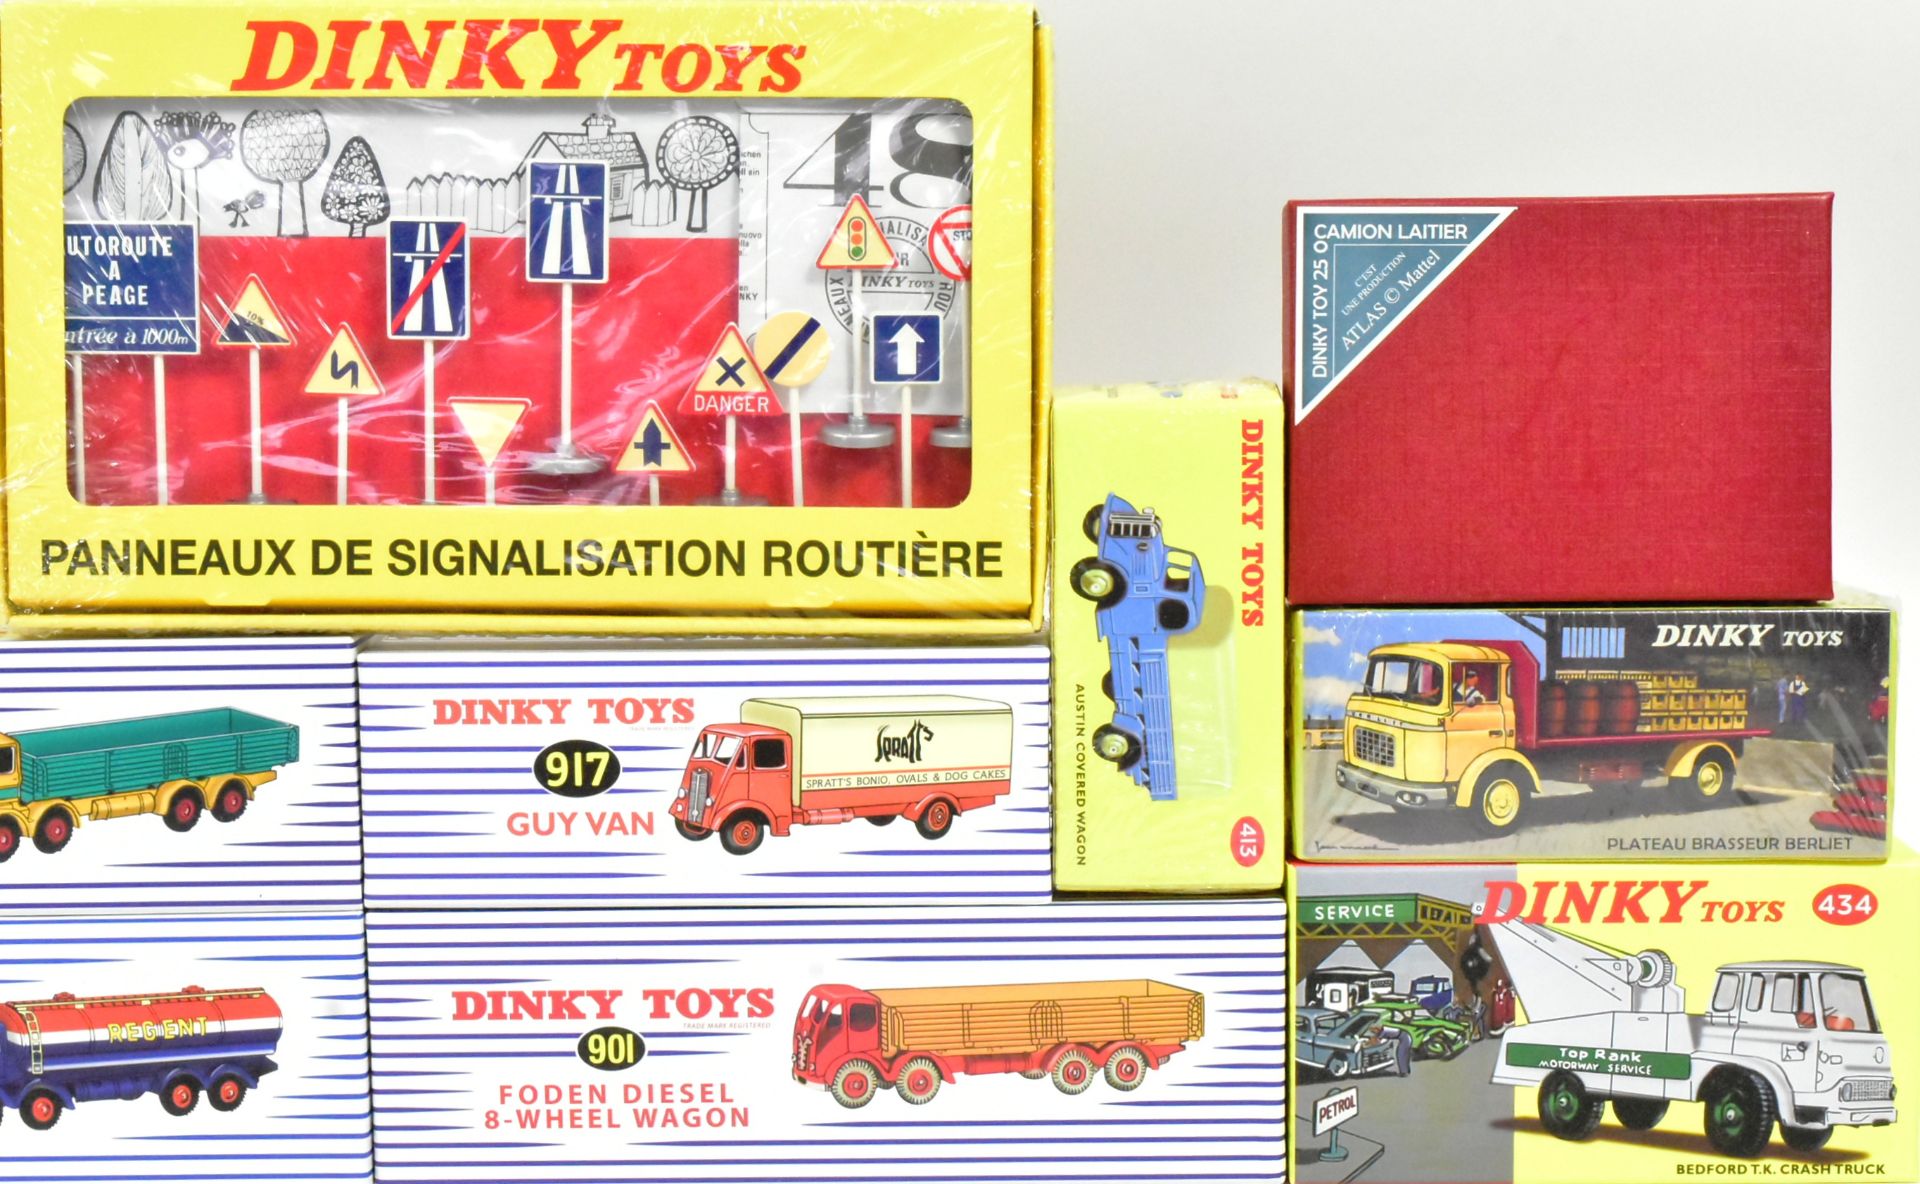 DIECAST - ATLAS EDITION DINKY TOYS - Image 3 of 4